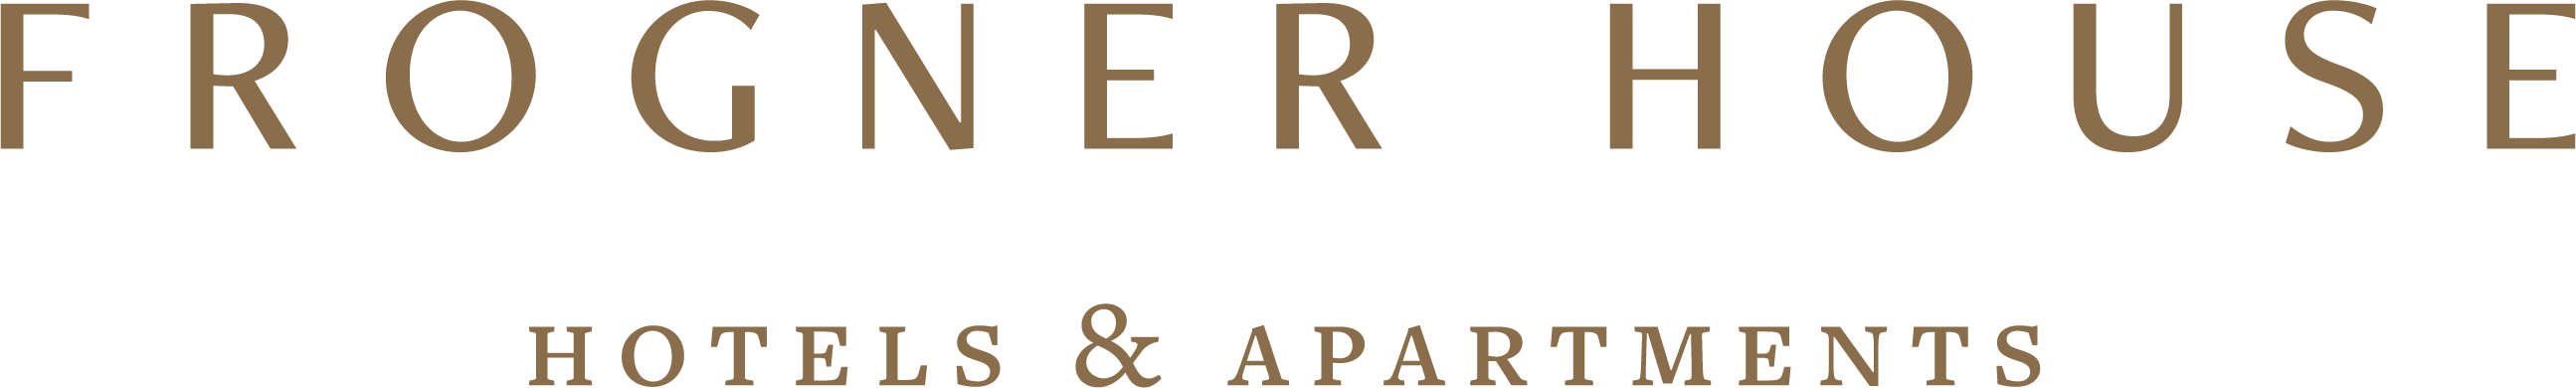 Frogner House Apartments Logo